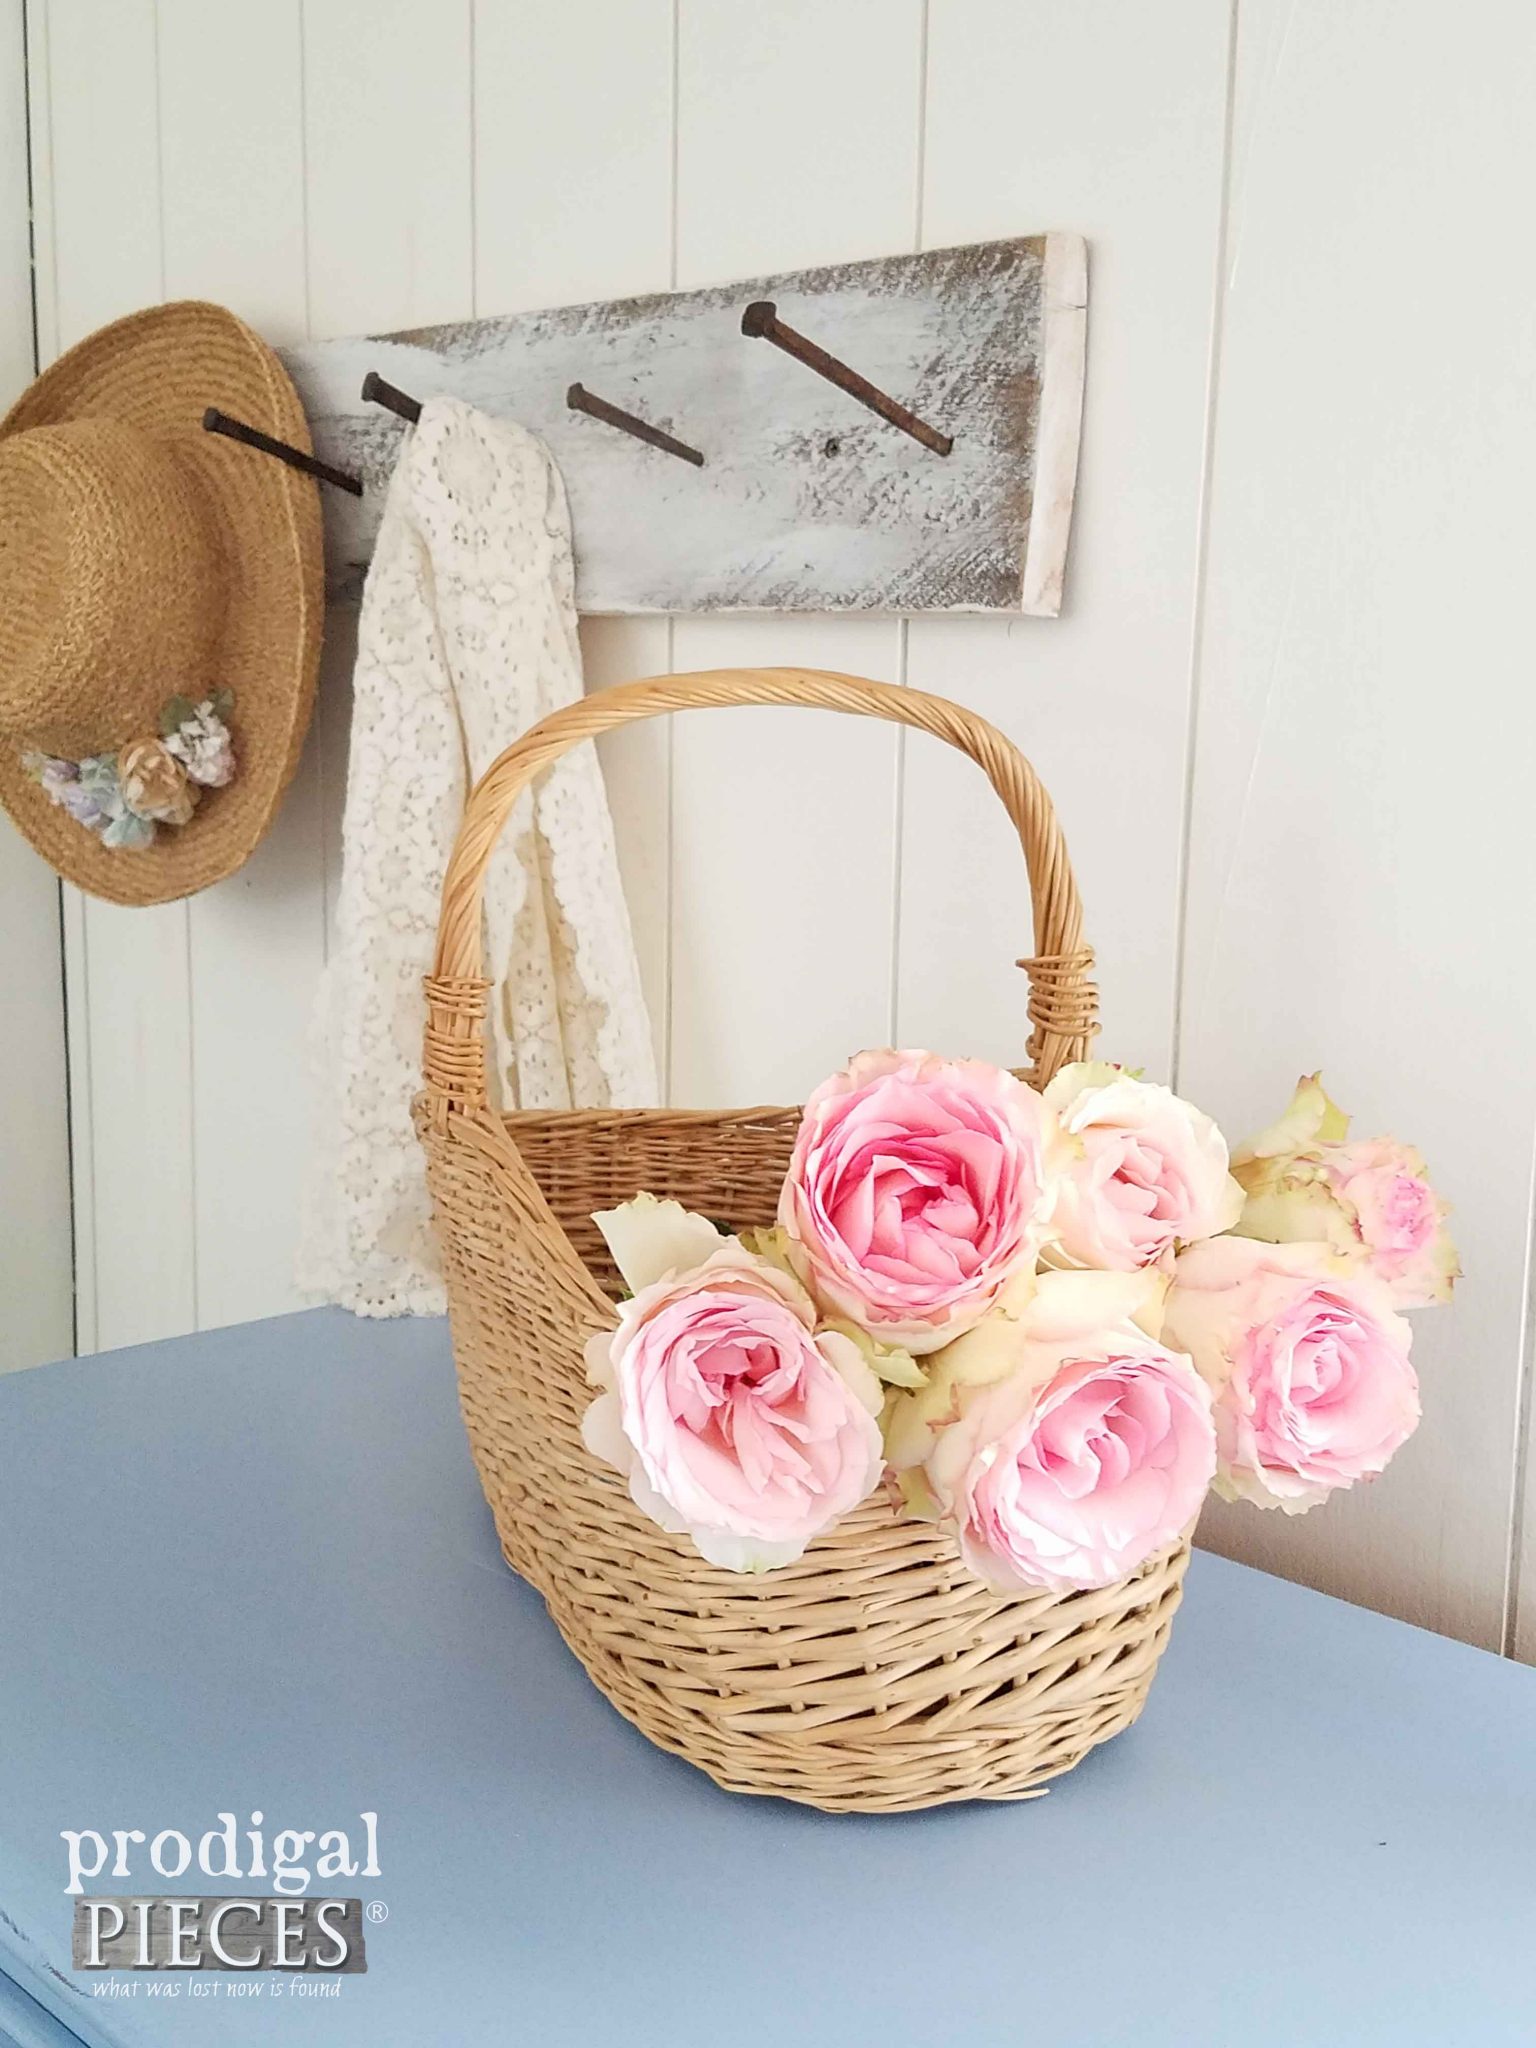 Basket of Roses in Girl's Bedroom | Prodigal Pieces | prodigalpieces.com